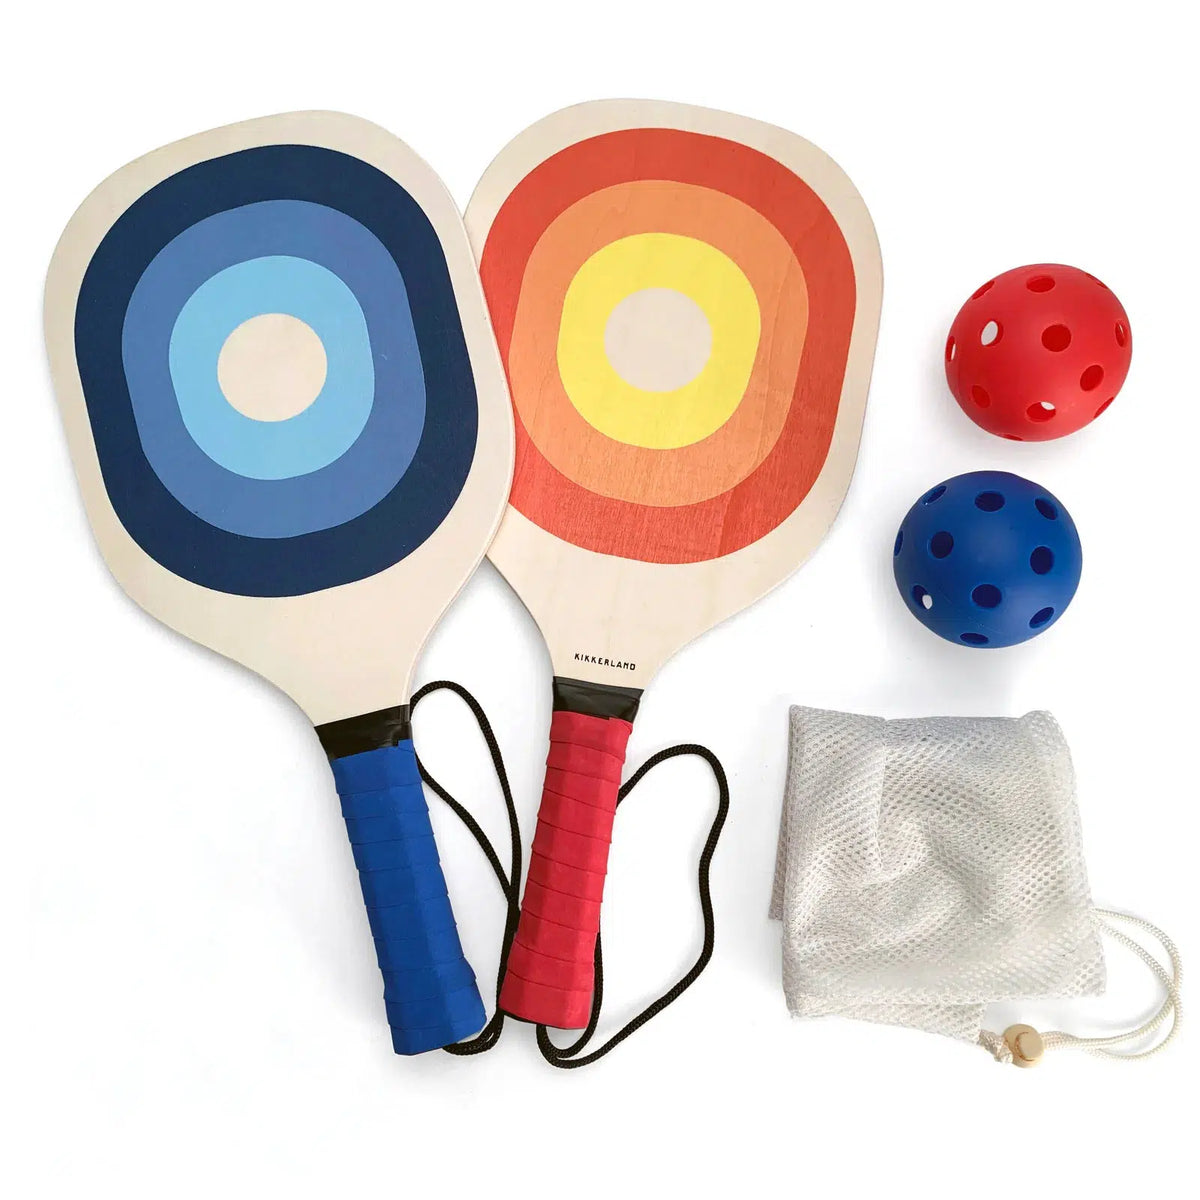 Front view of the contents of Pickleball laid out including the 2 paddles, 2 balls, and mesh bag.